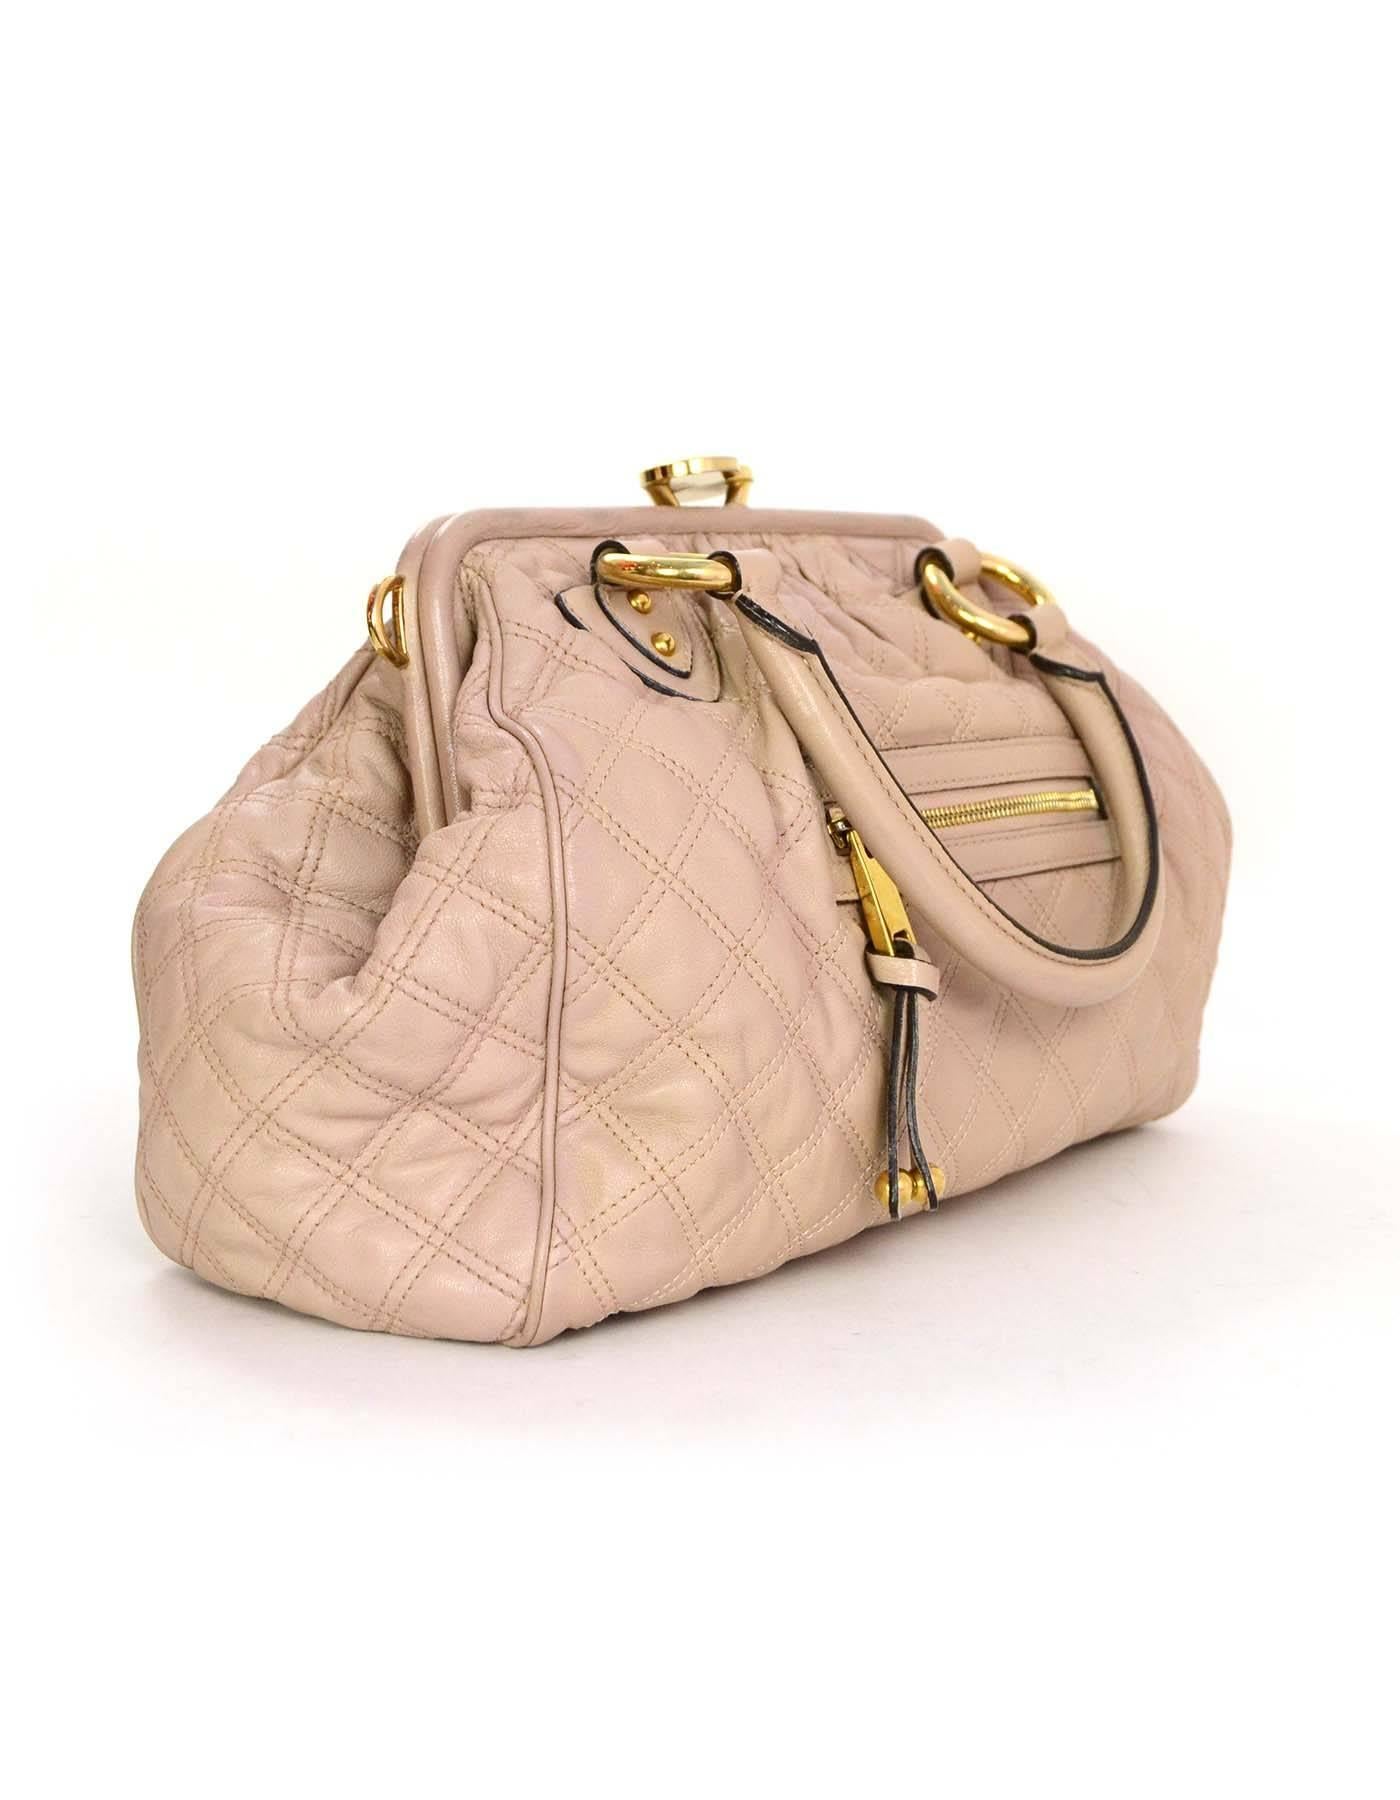 Marc Jacobs Blush Quilted Leather Stam Bag
Features optional chain link shoulder strap
Made In: Italy
Color: Blush
Hardware: Goldtone
Materials: Leather 
Lining: Beige canvas
Closure/Opening: Frame bag-style opening with kiss lock